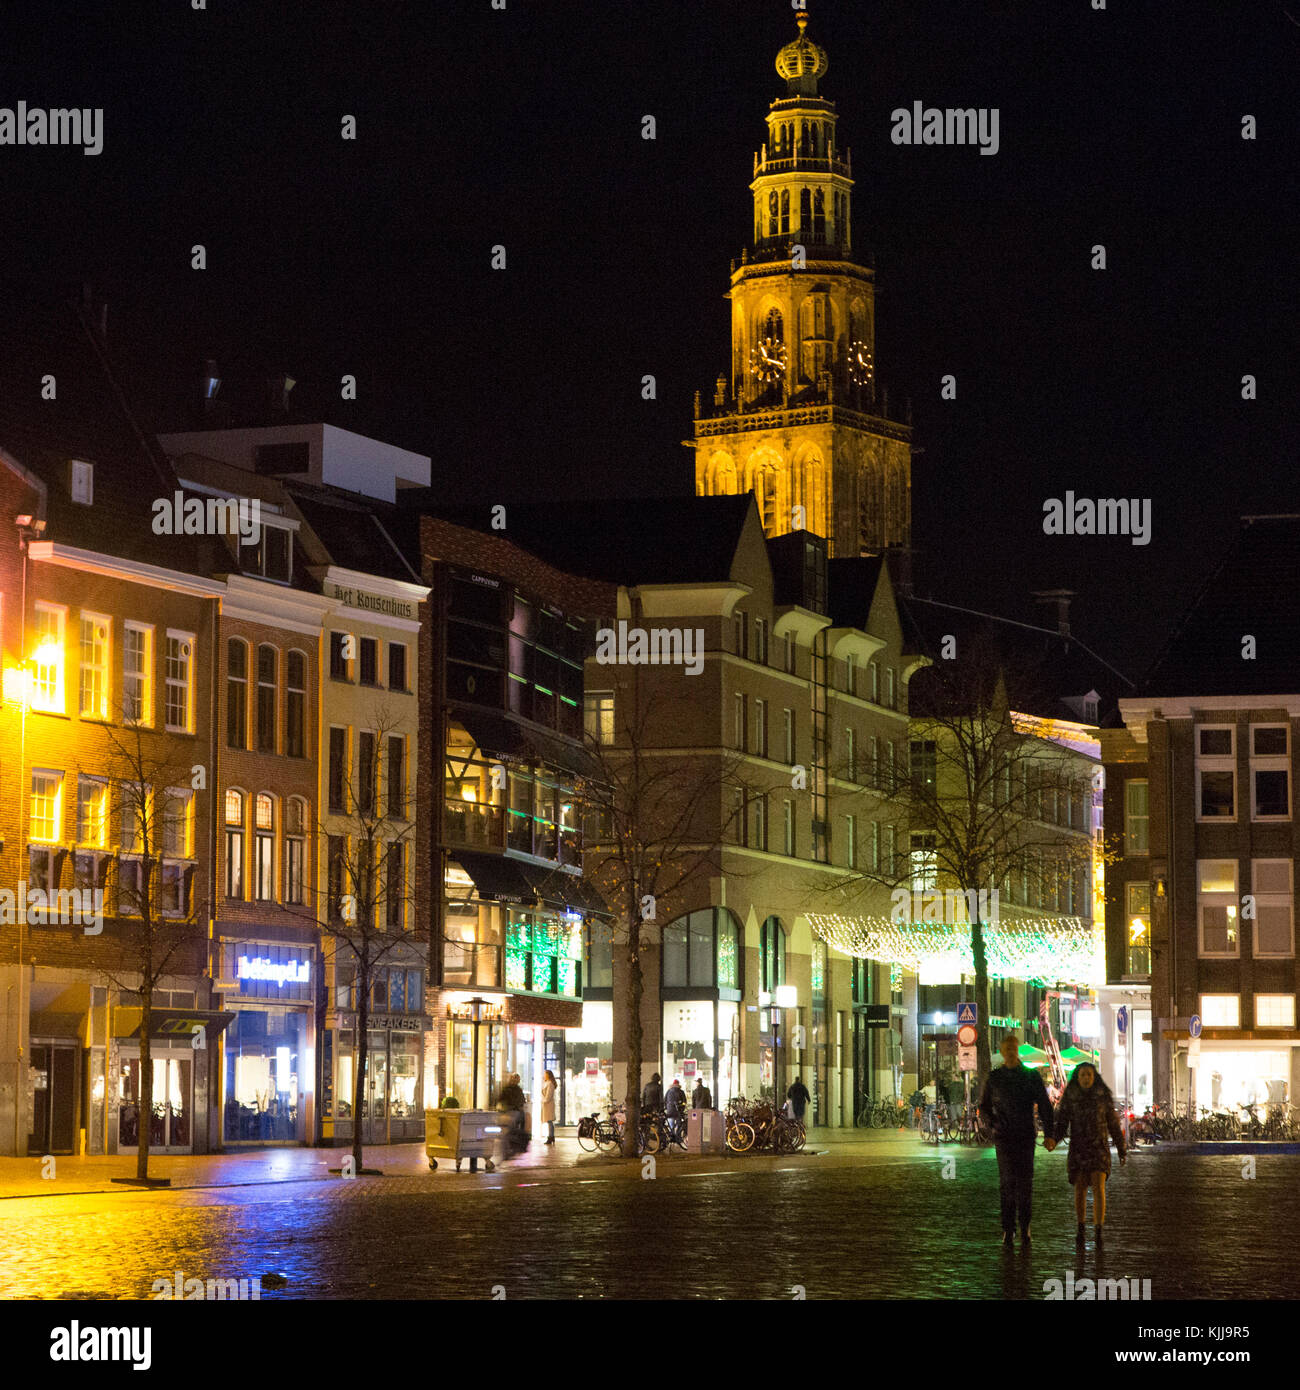 The Vismarkt (Fish Market) at night in central Groningen, the Netherlands. The Marketplace hosts markets on Tuesdays, Fridays and Saturdays. Stock Photo